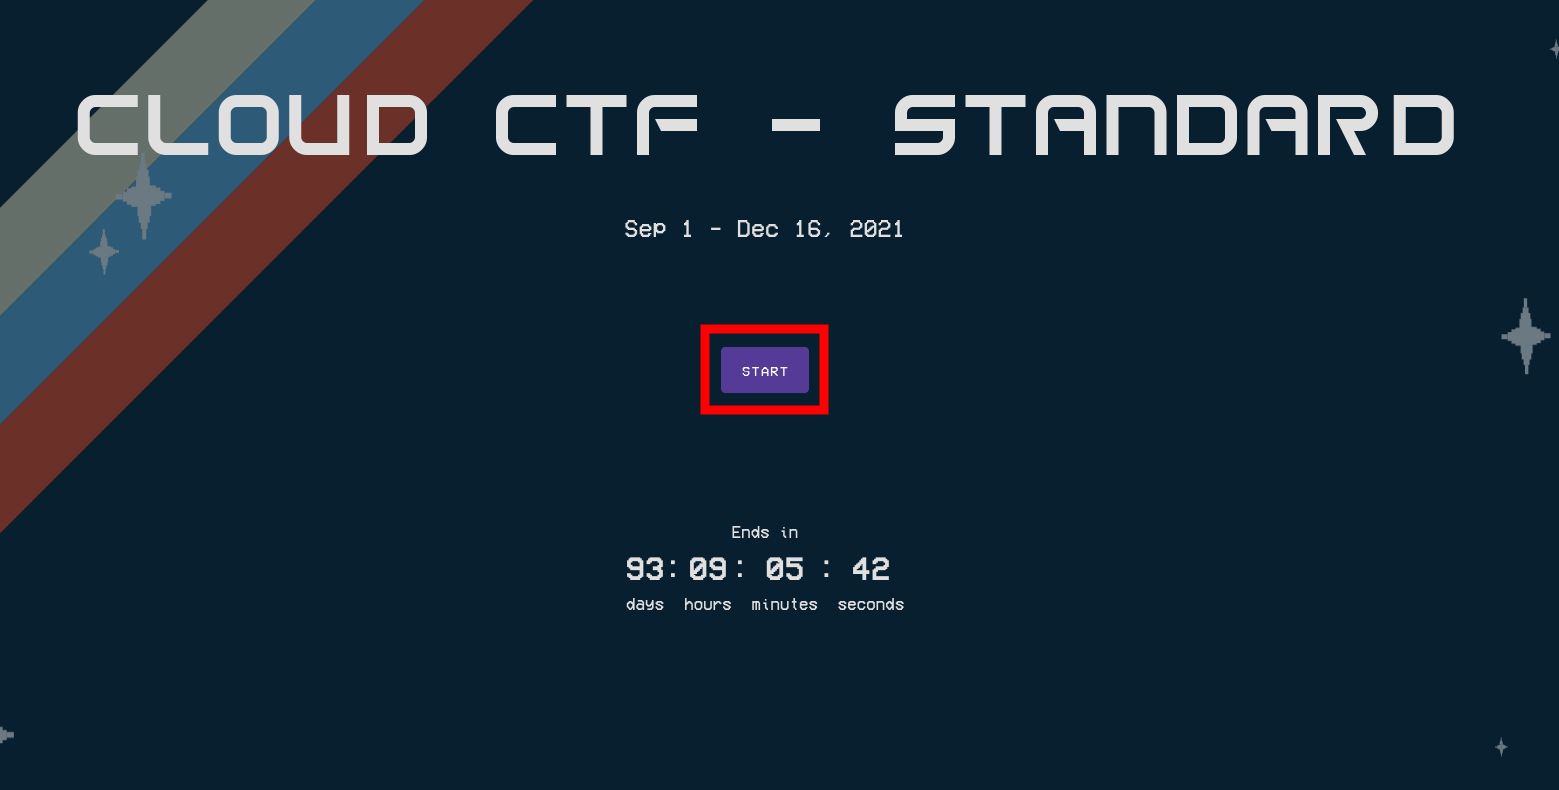 An example of the CloudCTF start screen and start button is shown.